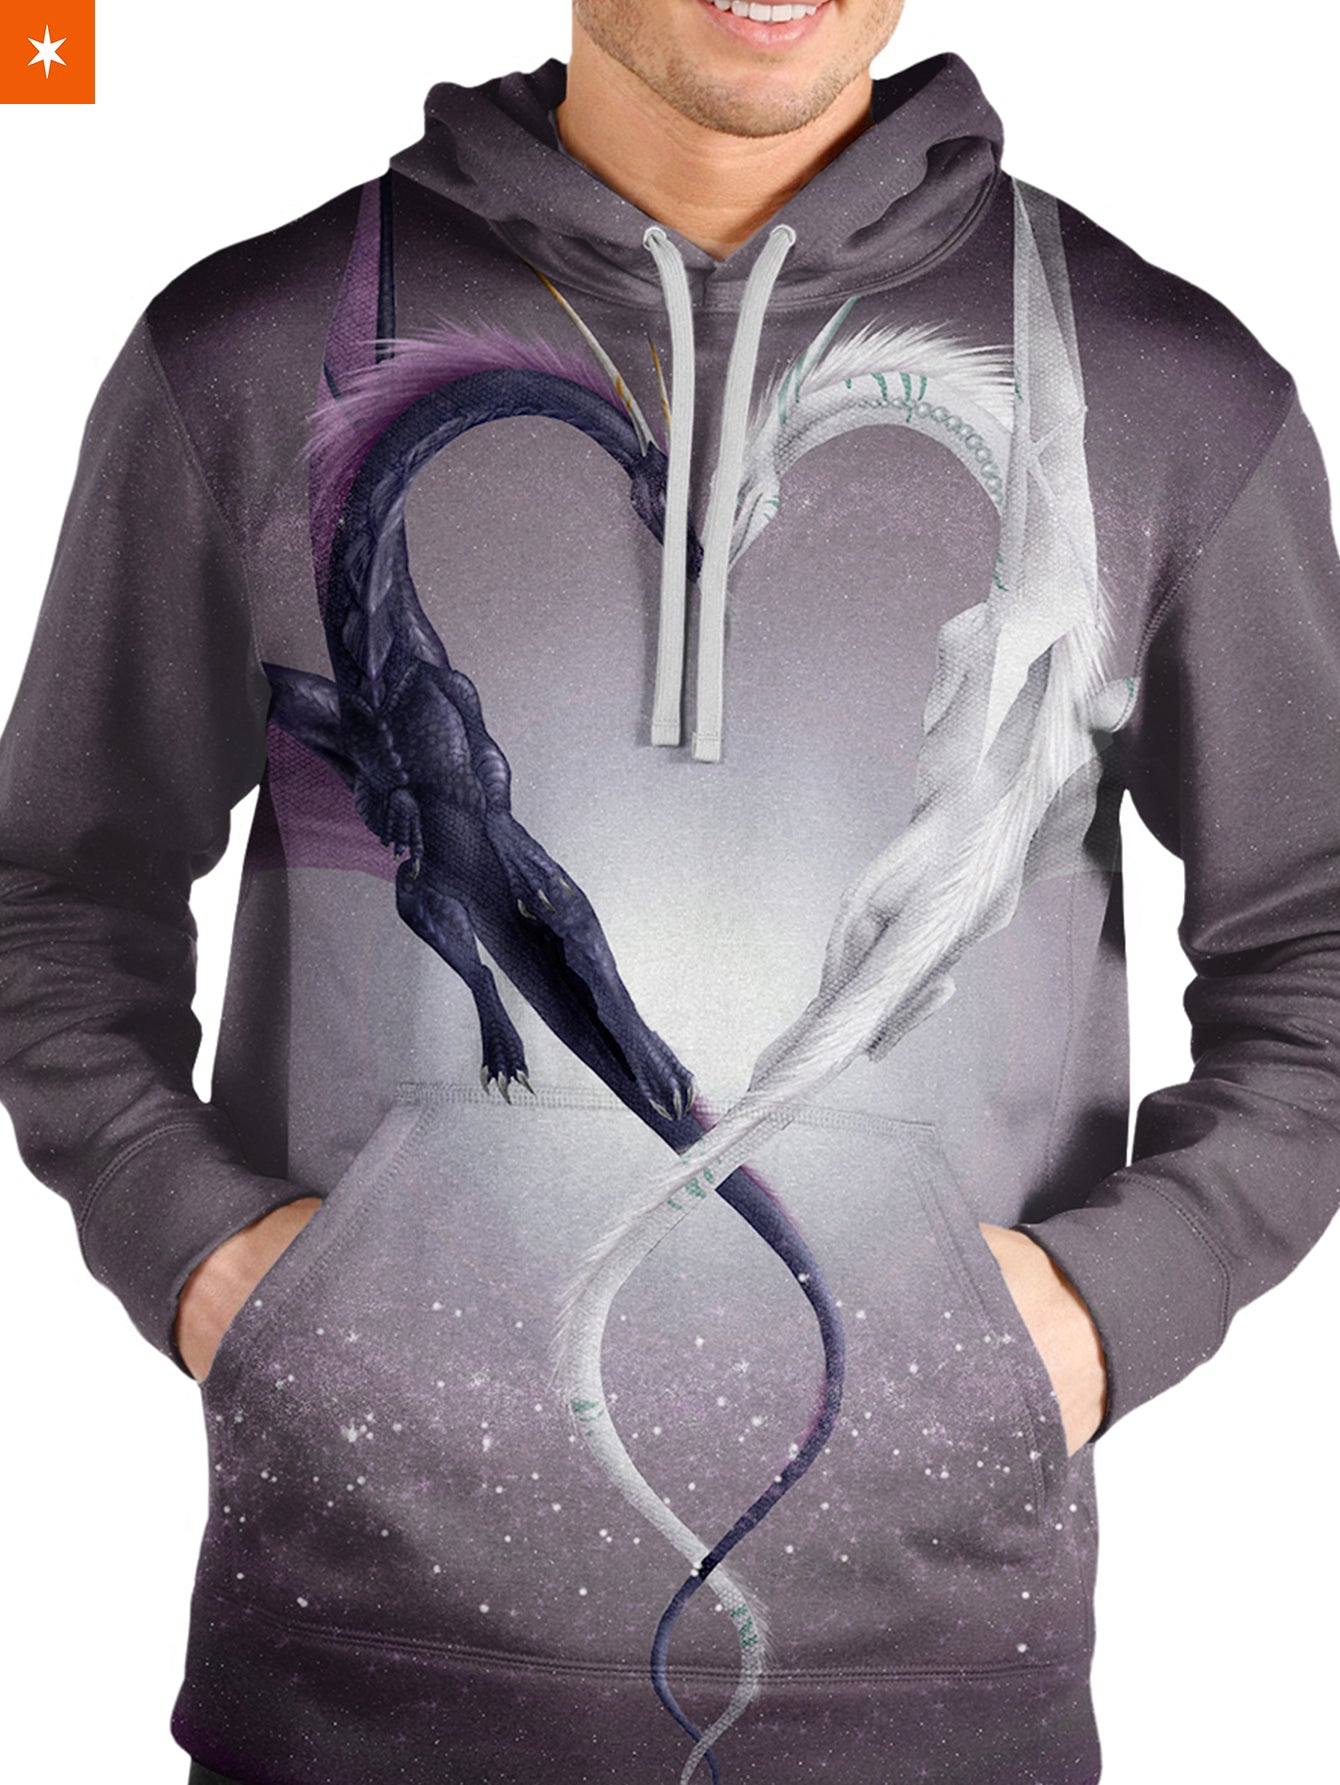 Fandomaniax - The Dance of Dragons Unisex Pullover Hoodie